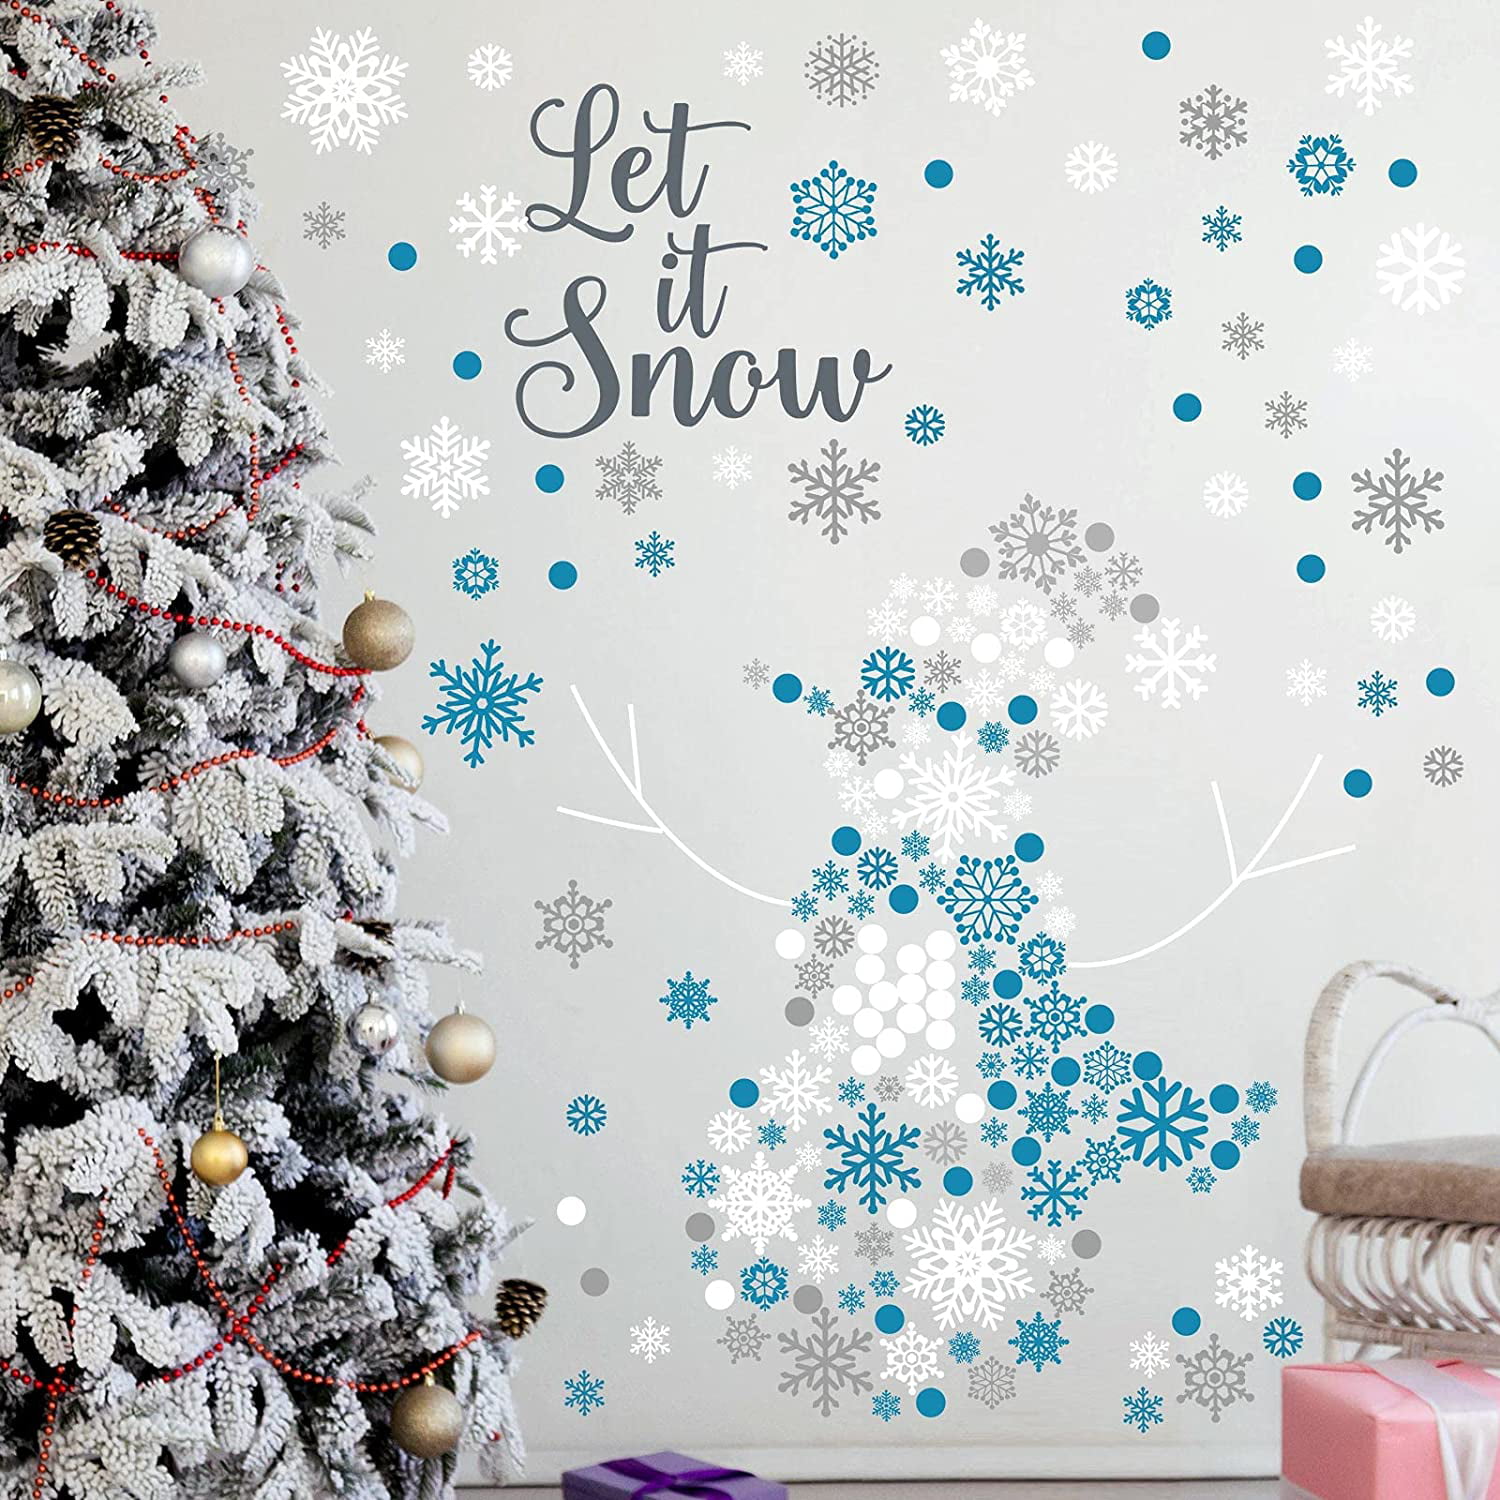 3 Colors 15 Sheets Christmas Wall Decals Snowflakes Wall Decal Silver and Blue Frozen Theme Christmas Snowflake Wall Stickers Let It Snow Winter Wall Decals Christmas Home Decoration for Party 